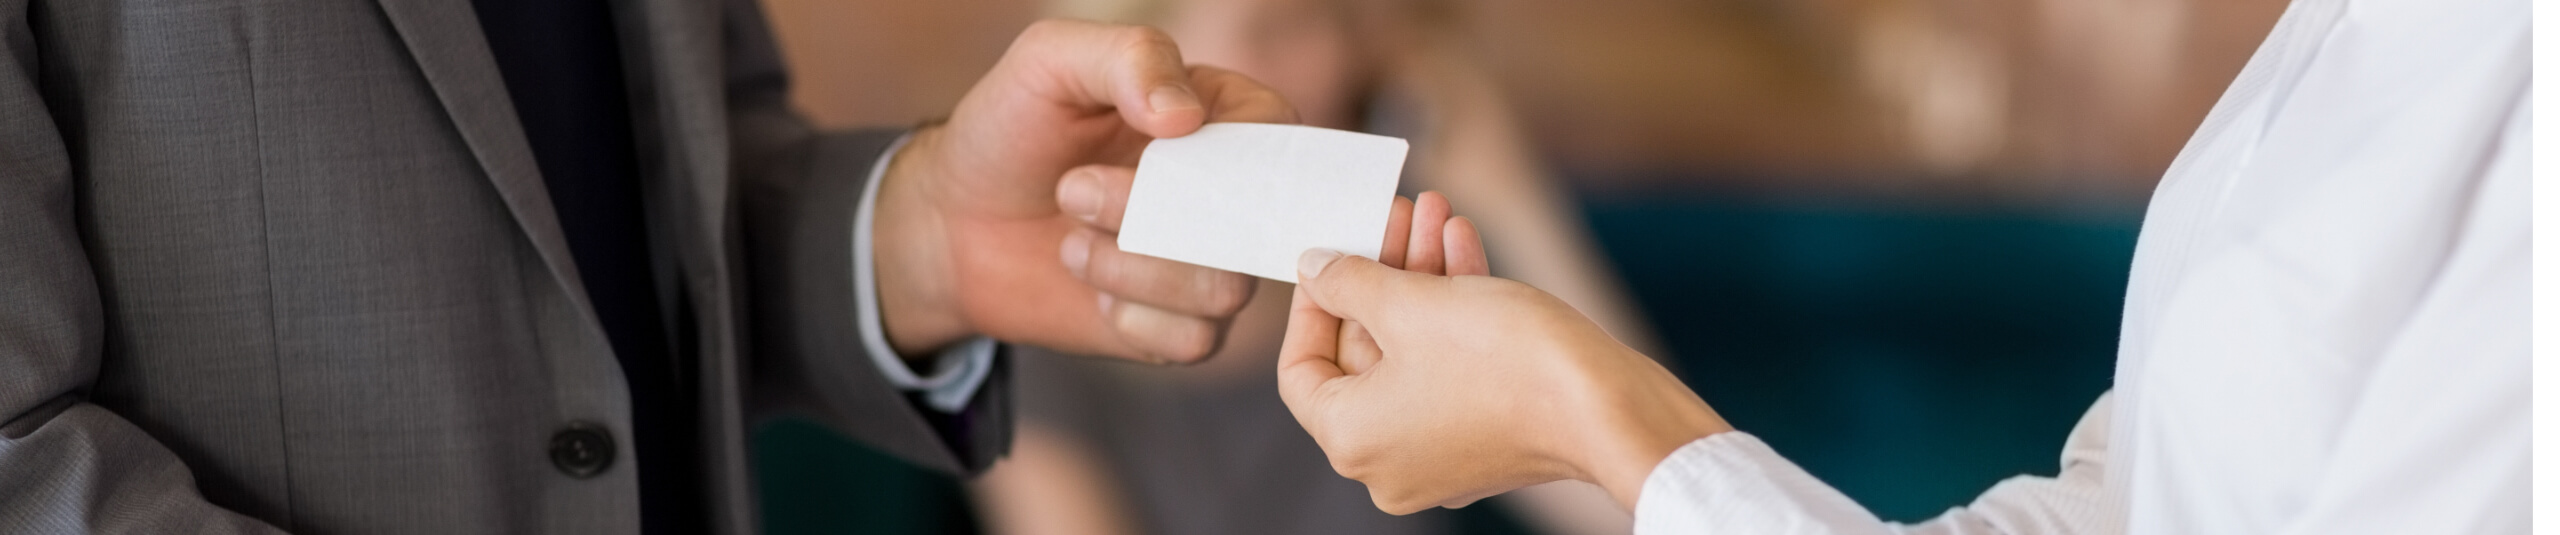 Male handing female a business card